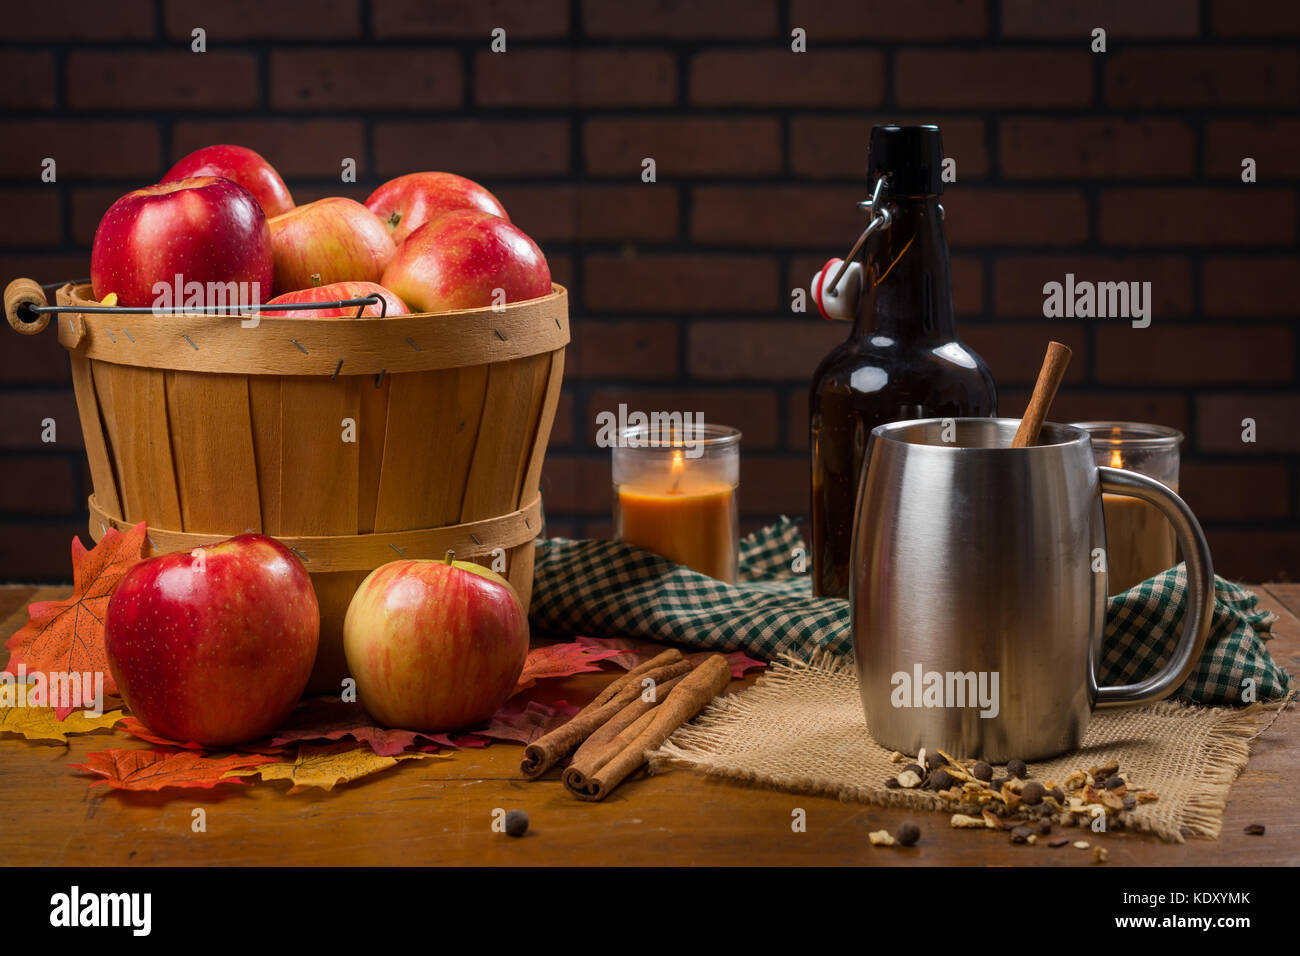 Silver mug with a cinnamon stick next to basket of apples Stock Photo